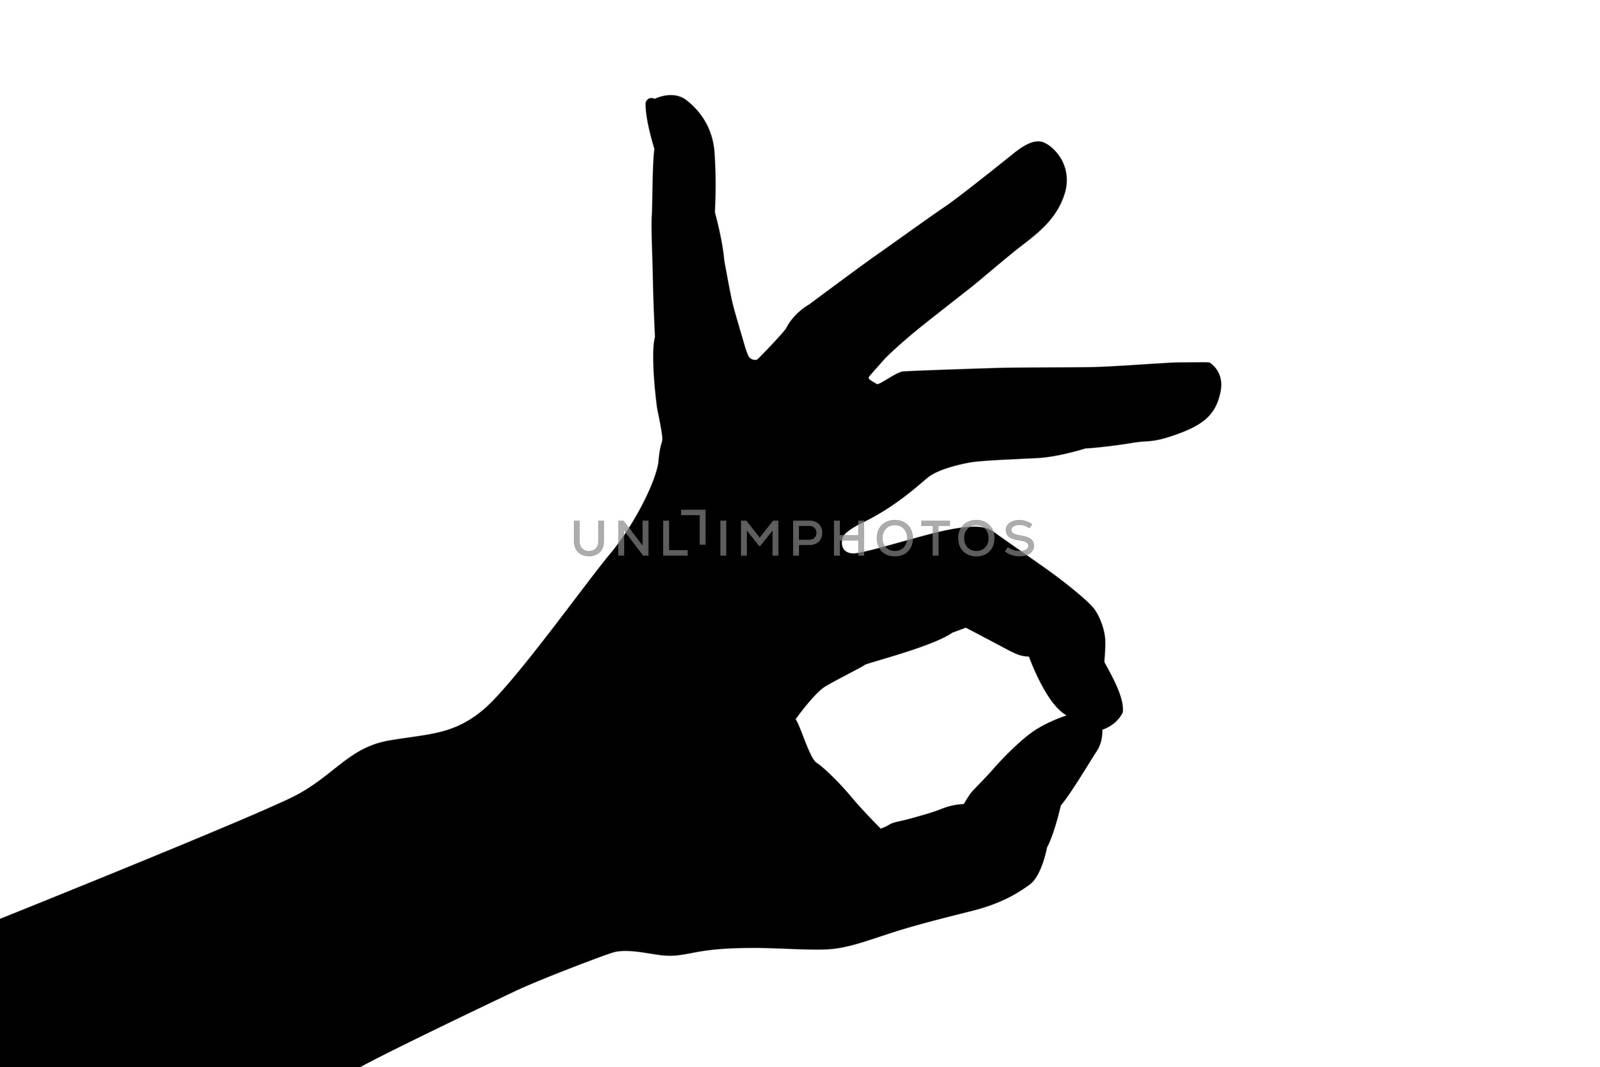 black shadow of finger hand symbols isolated the concept hand gesturing sign ok okay agree on white background.